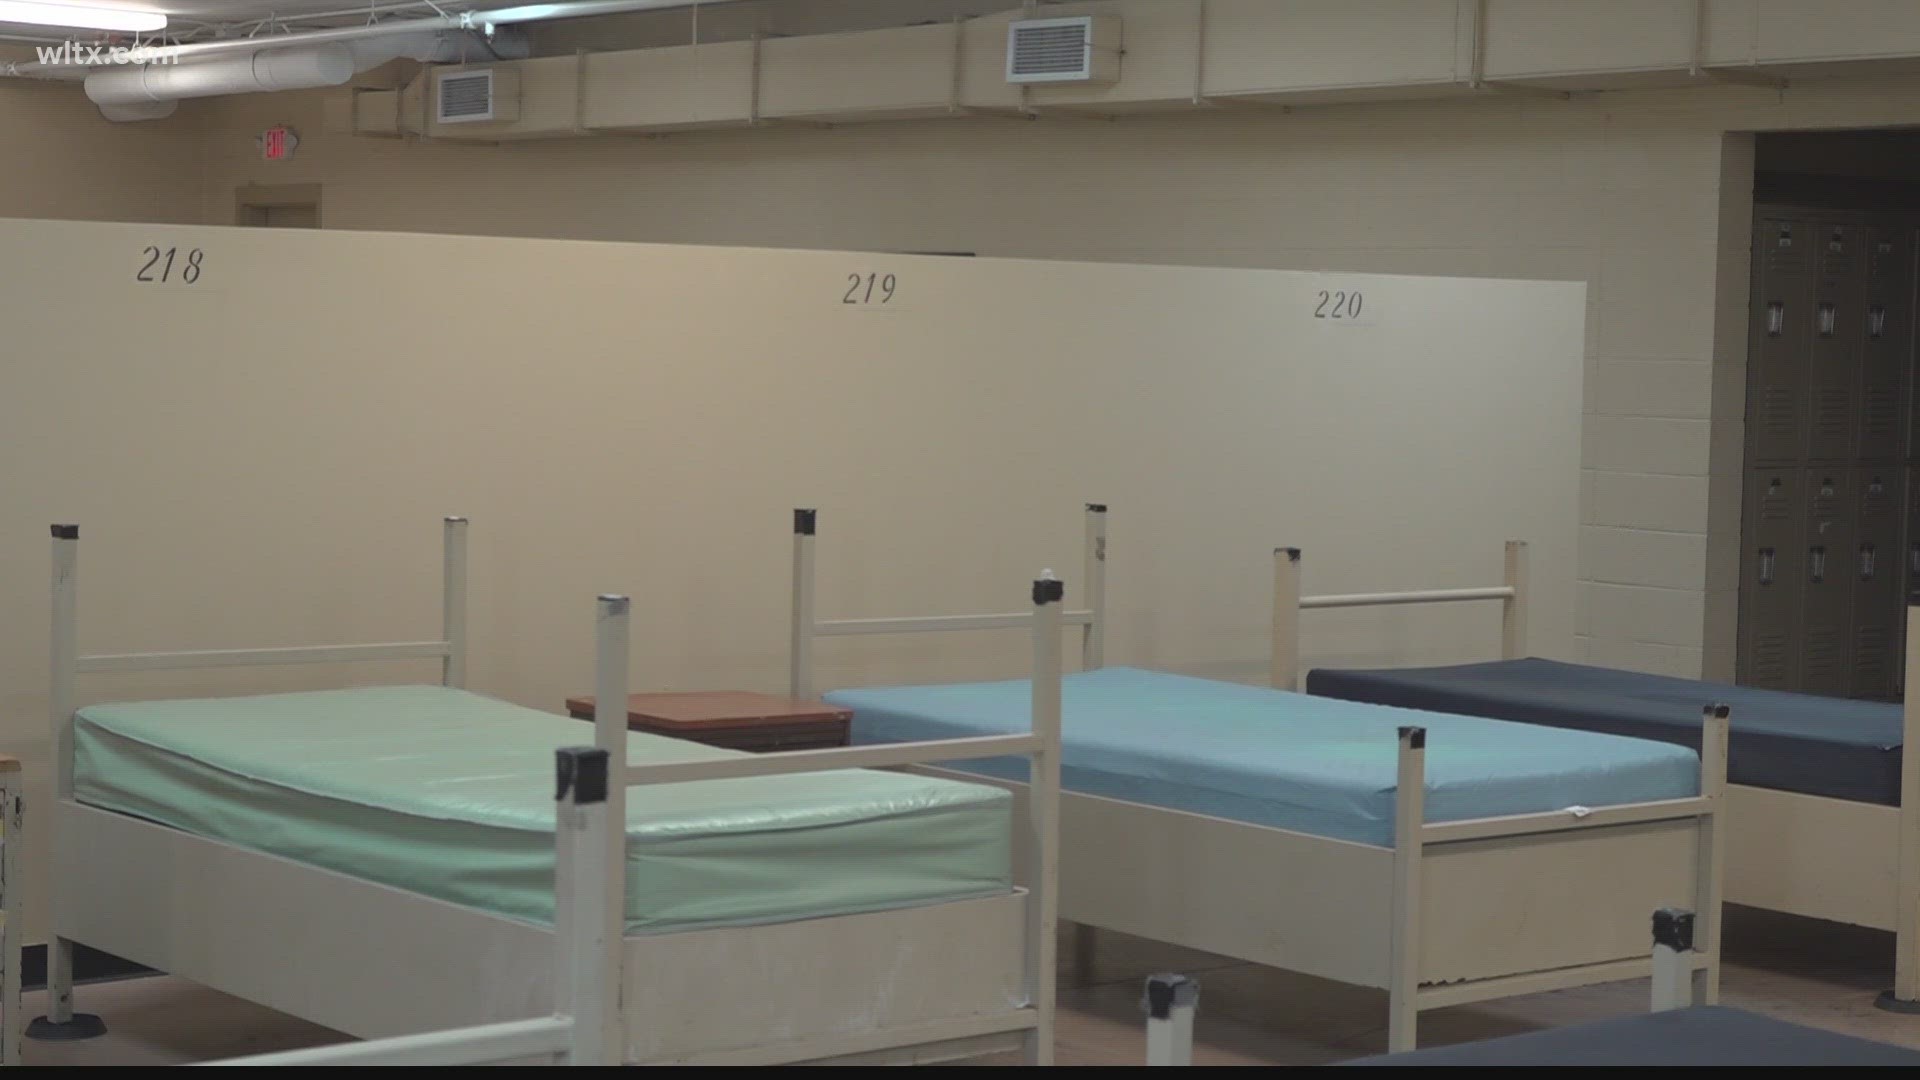 Transitions Homeless shelter is opening a new dorm to help get some veterans off the street.